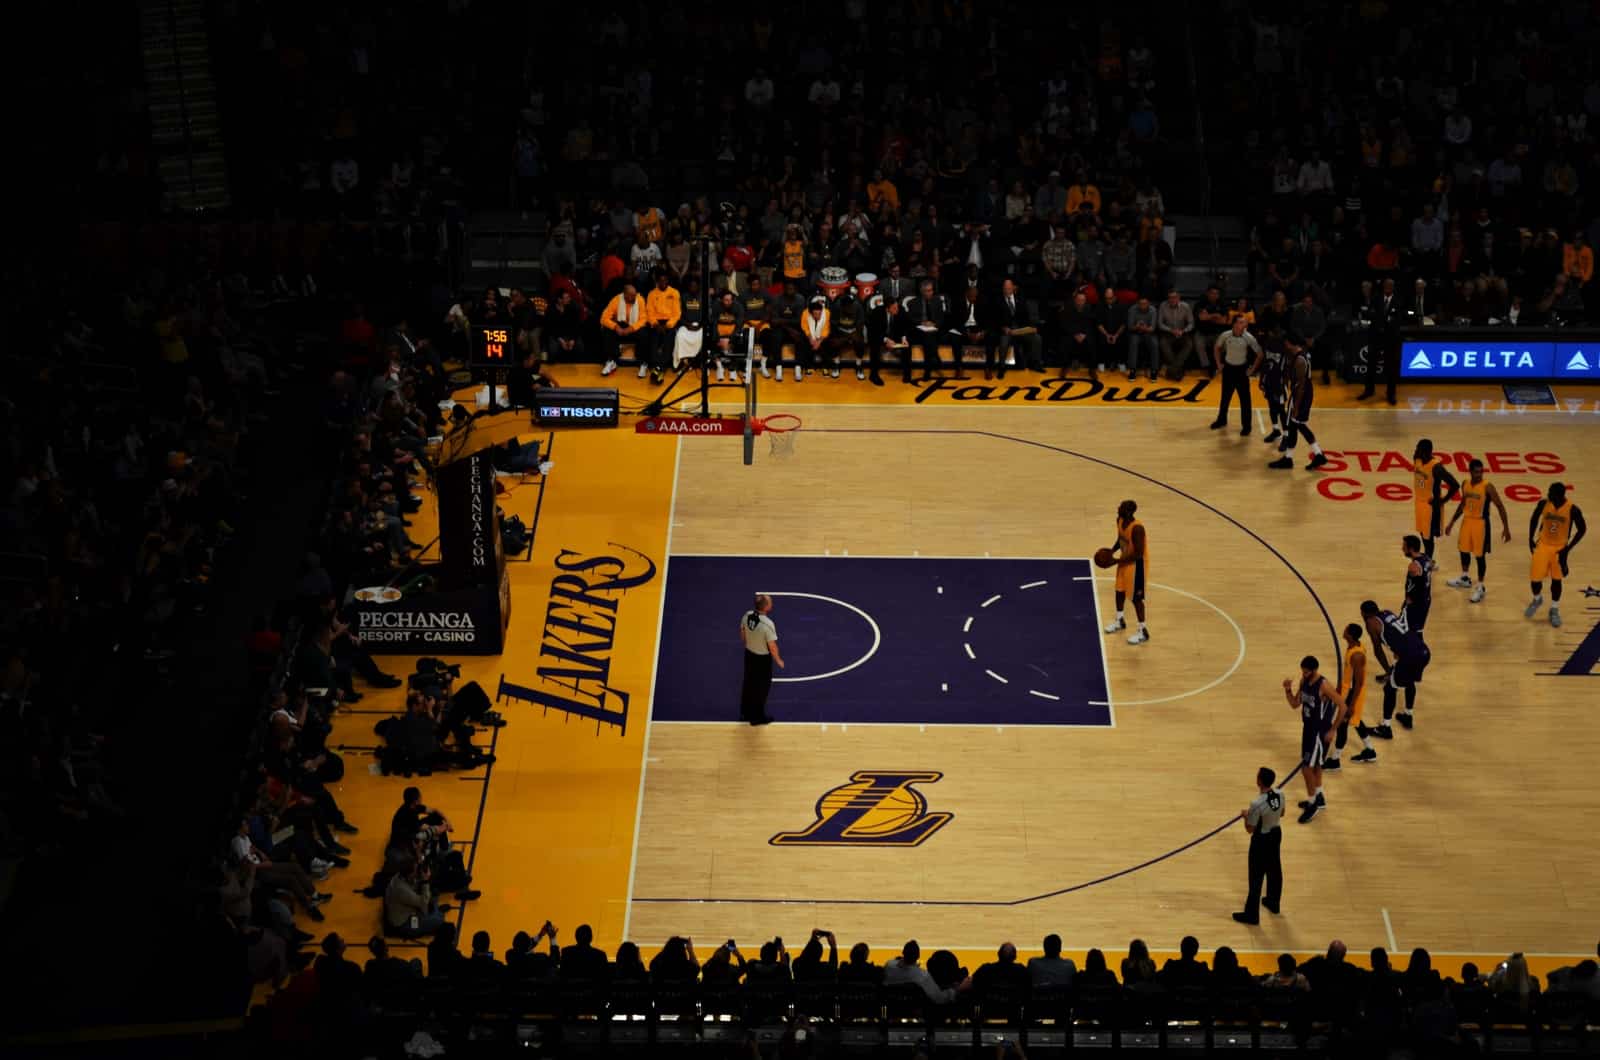 Can you jump on a free throw? Lakers player taking technical freethrow